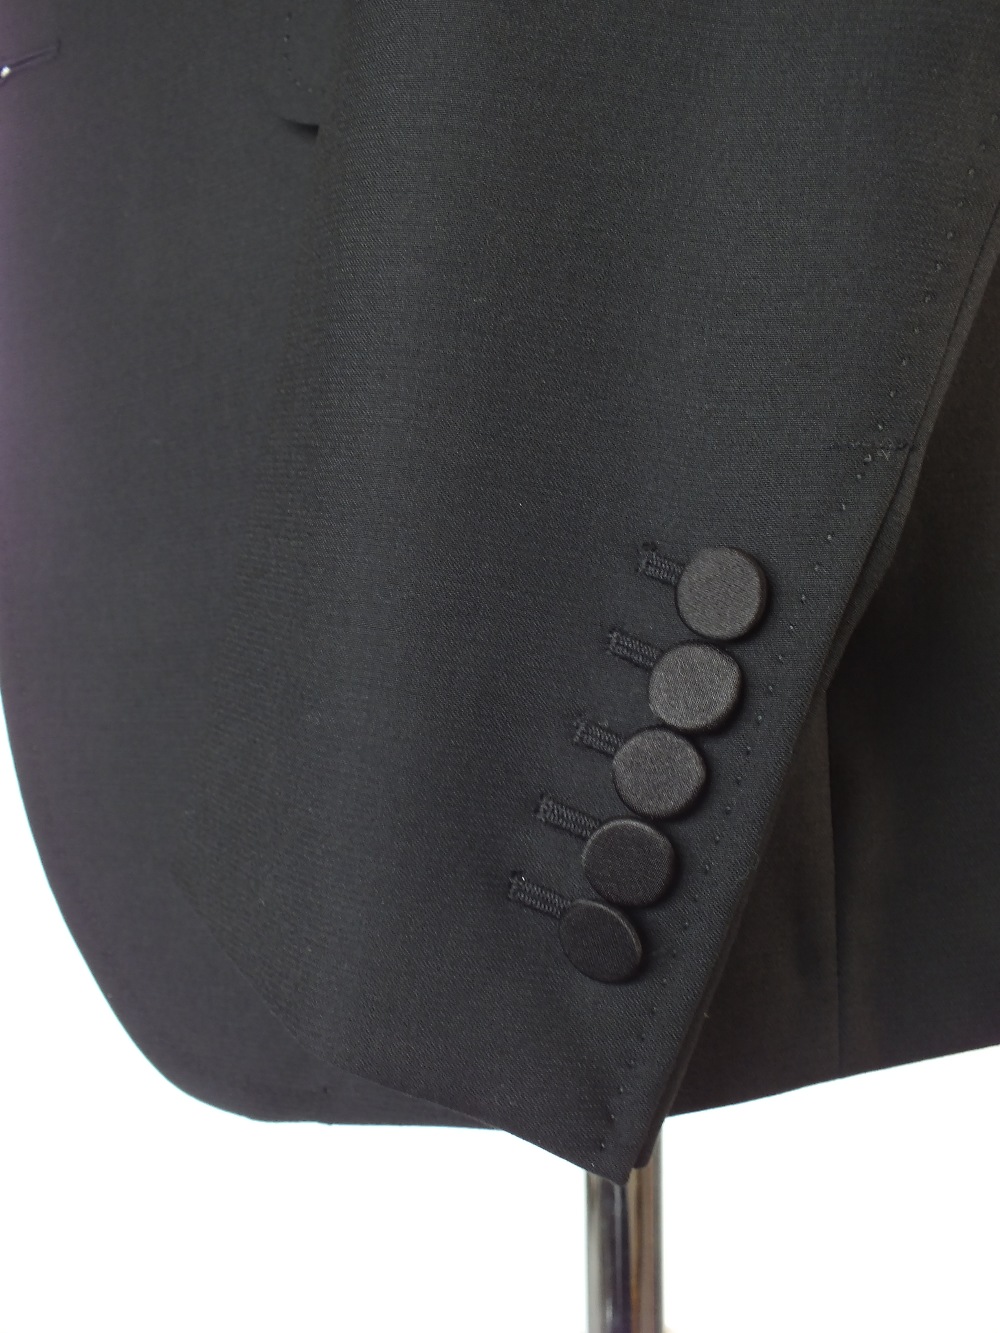 A Gucci dinner suit, black, lower lapel with satin detailing, double vent, Italian size 52R, 100% - Image 5 of 6